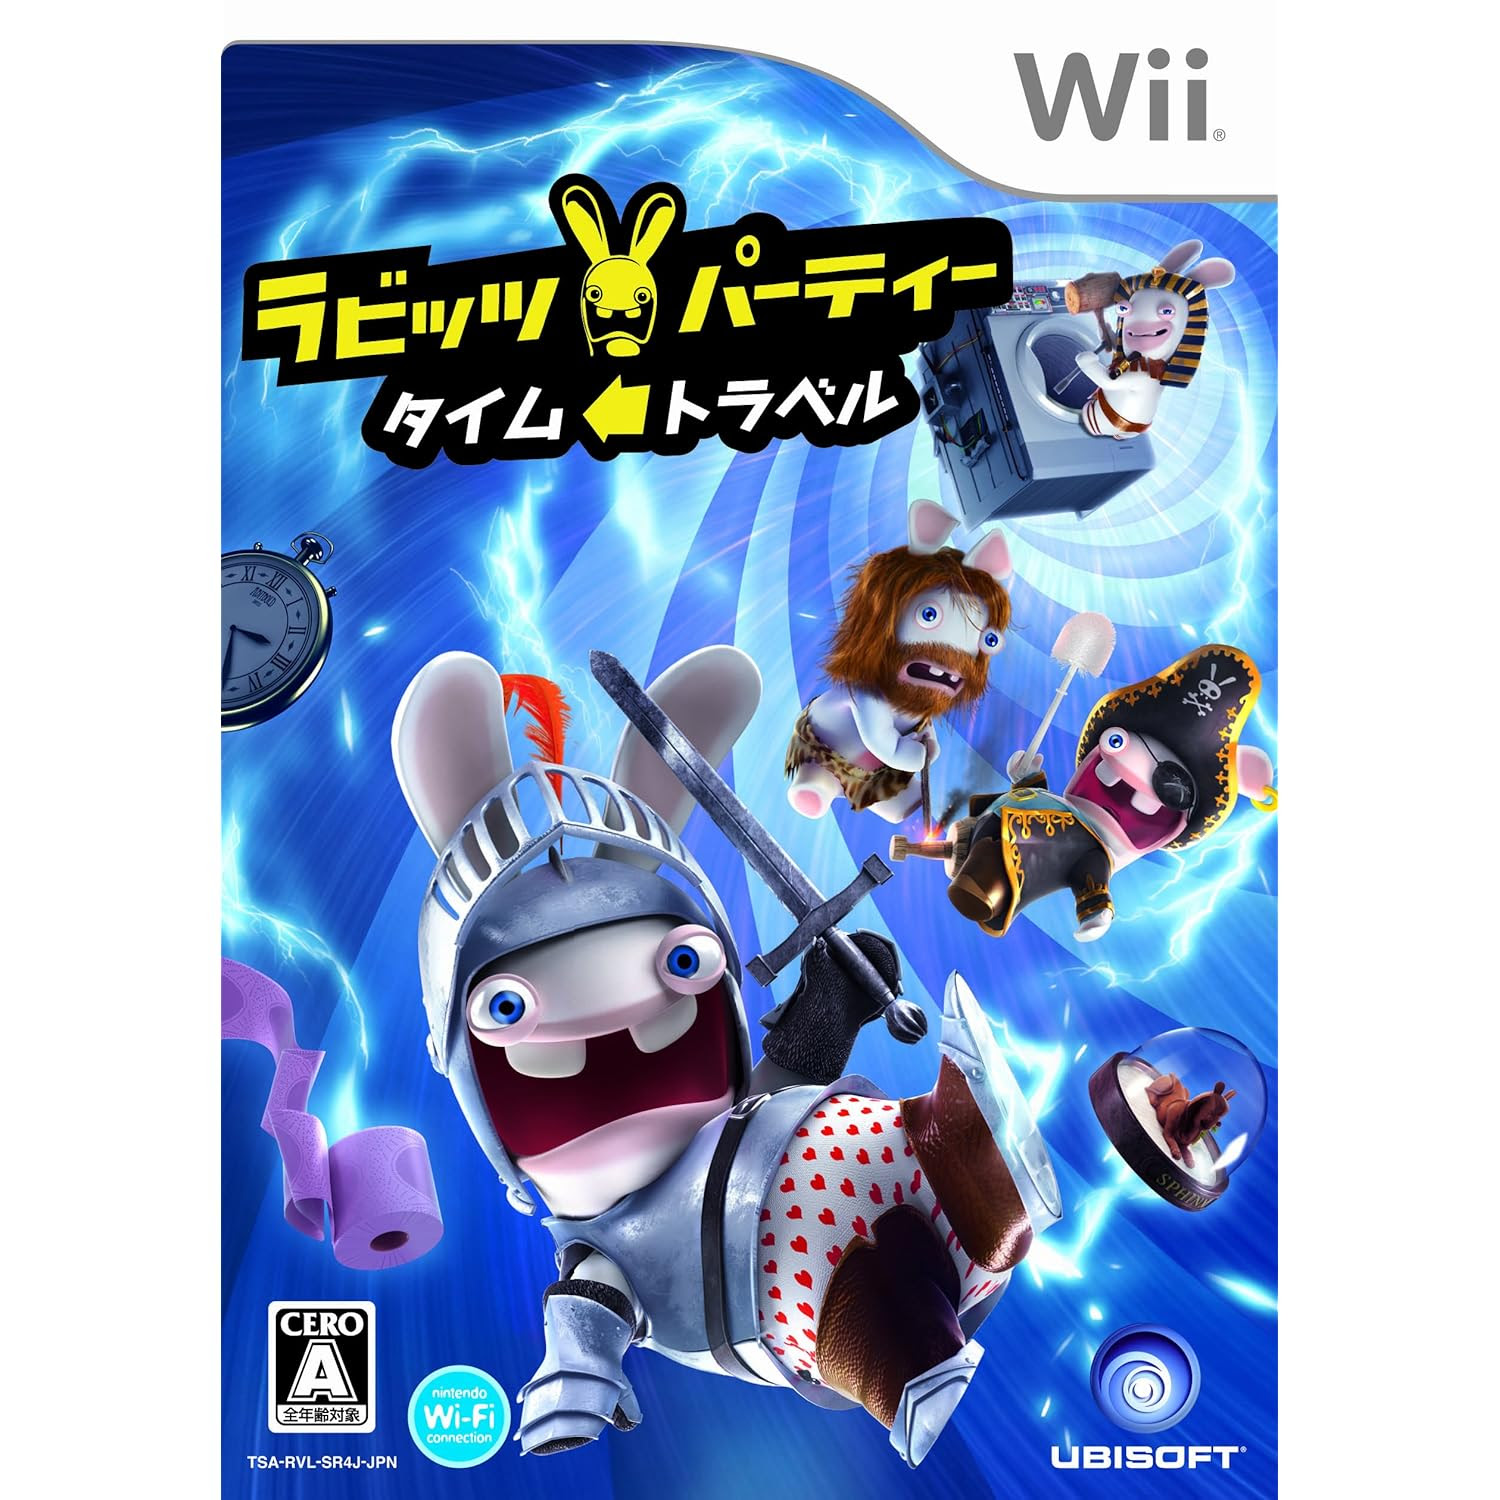 Wii Iso Torrent : Super Mario Galaxy 2 Wii Iso Ntsc Torrents - megazonecms  / We have the largest collection of wii emulator games online. - ram-boiu